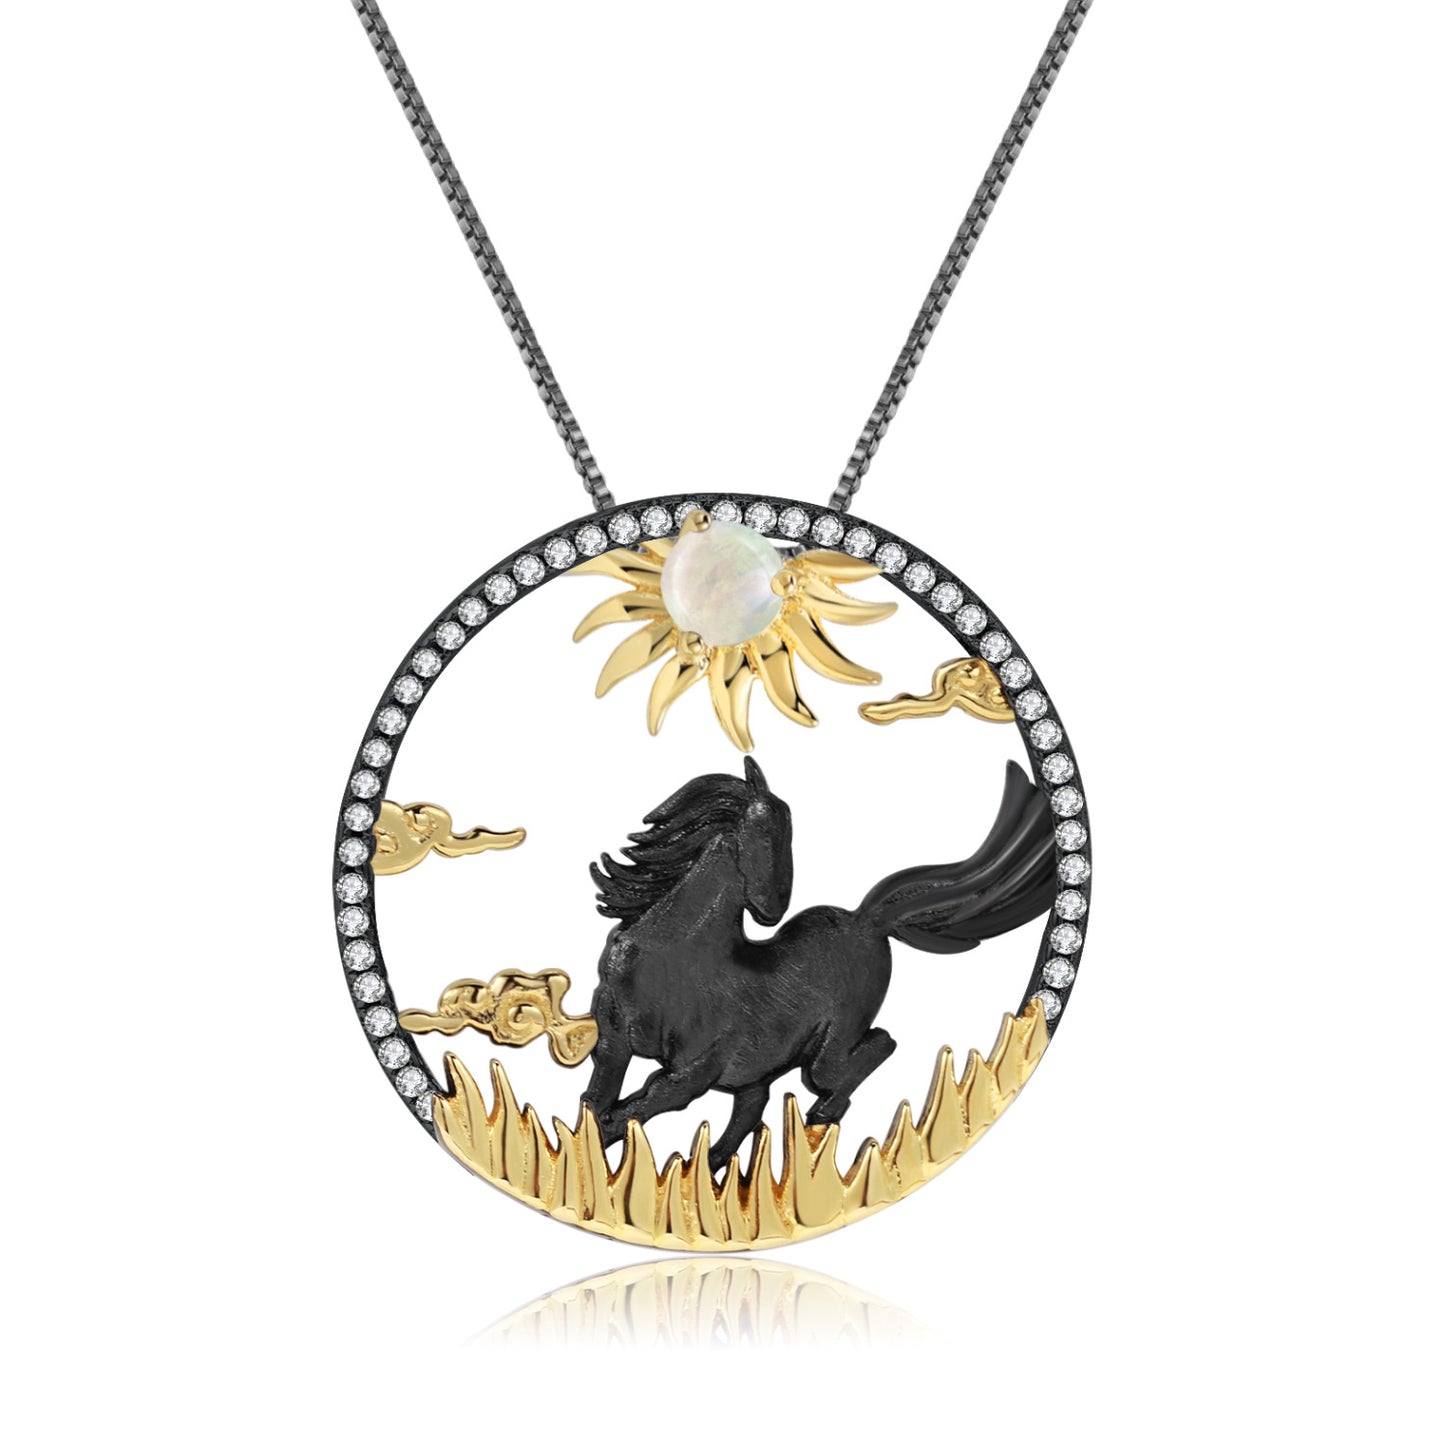 Chinese Style Element Design Zodiac Series Horse Natural Gemstone Pendant Silver Necklace for Women